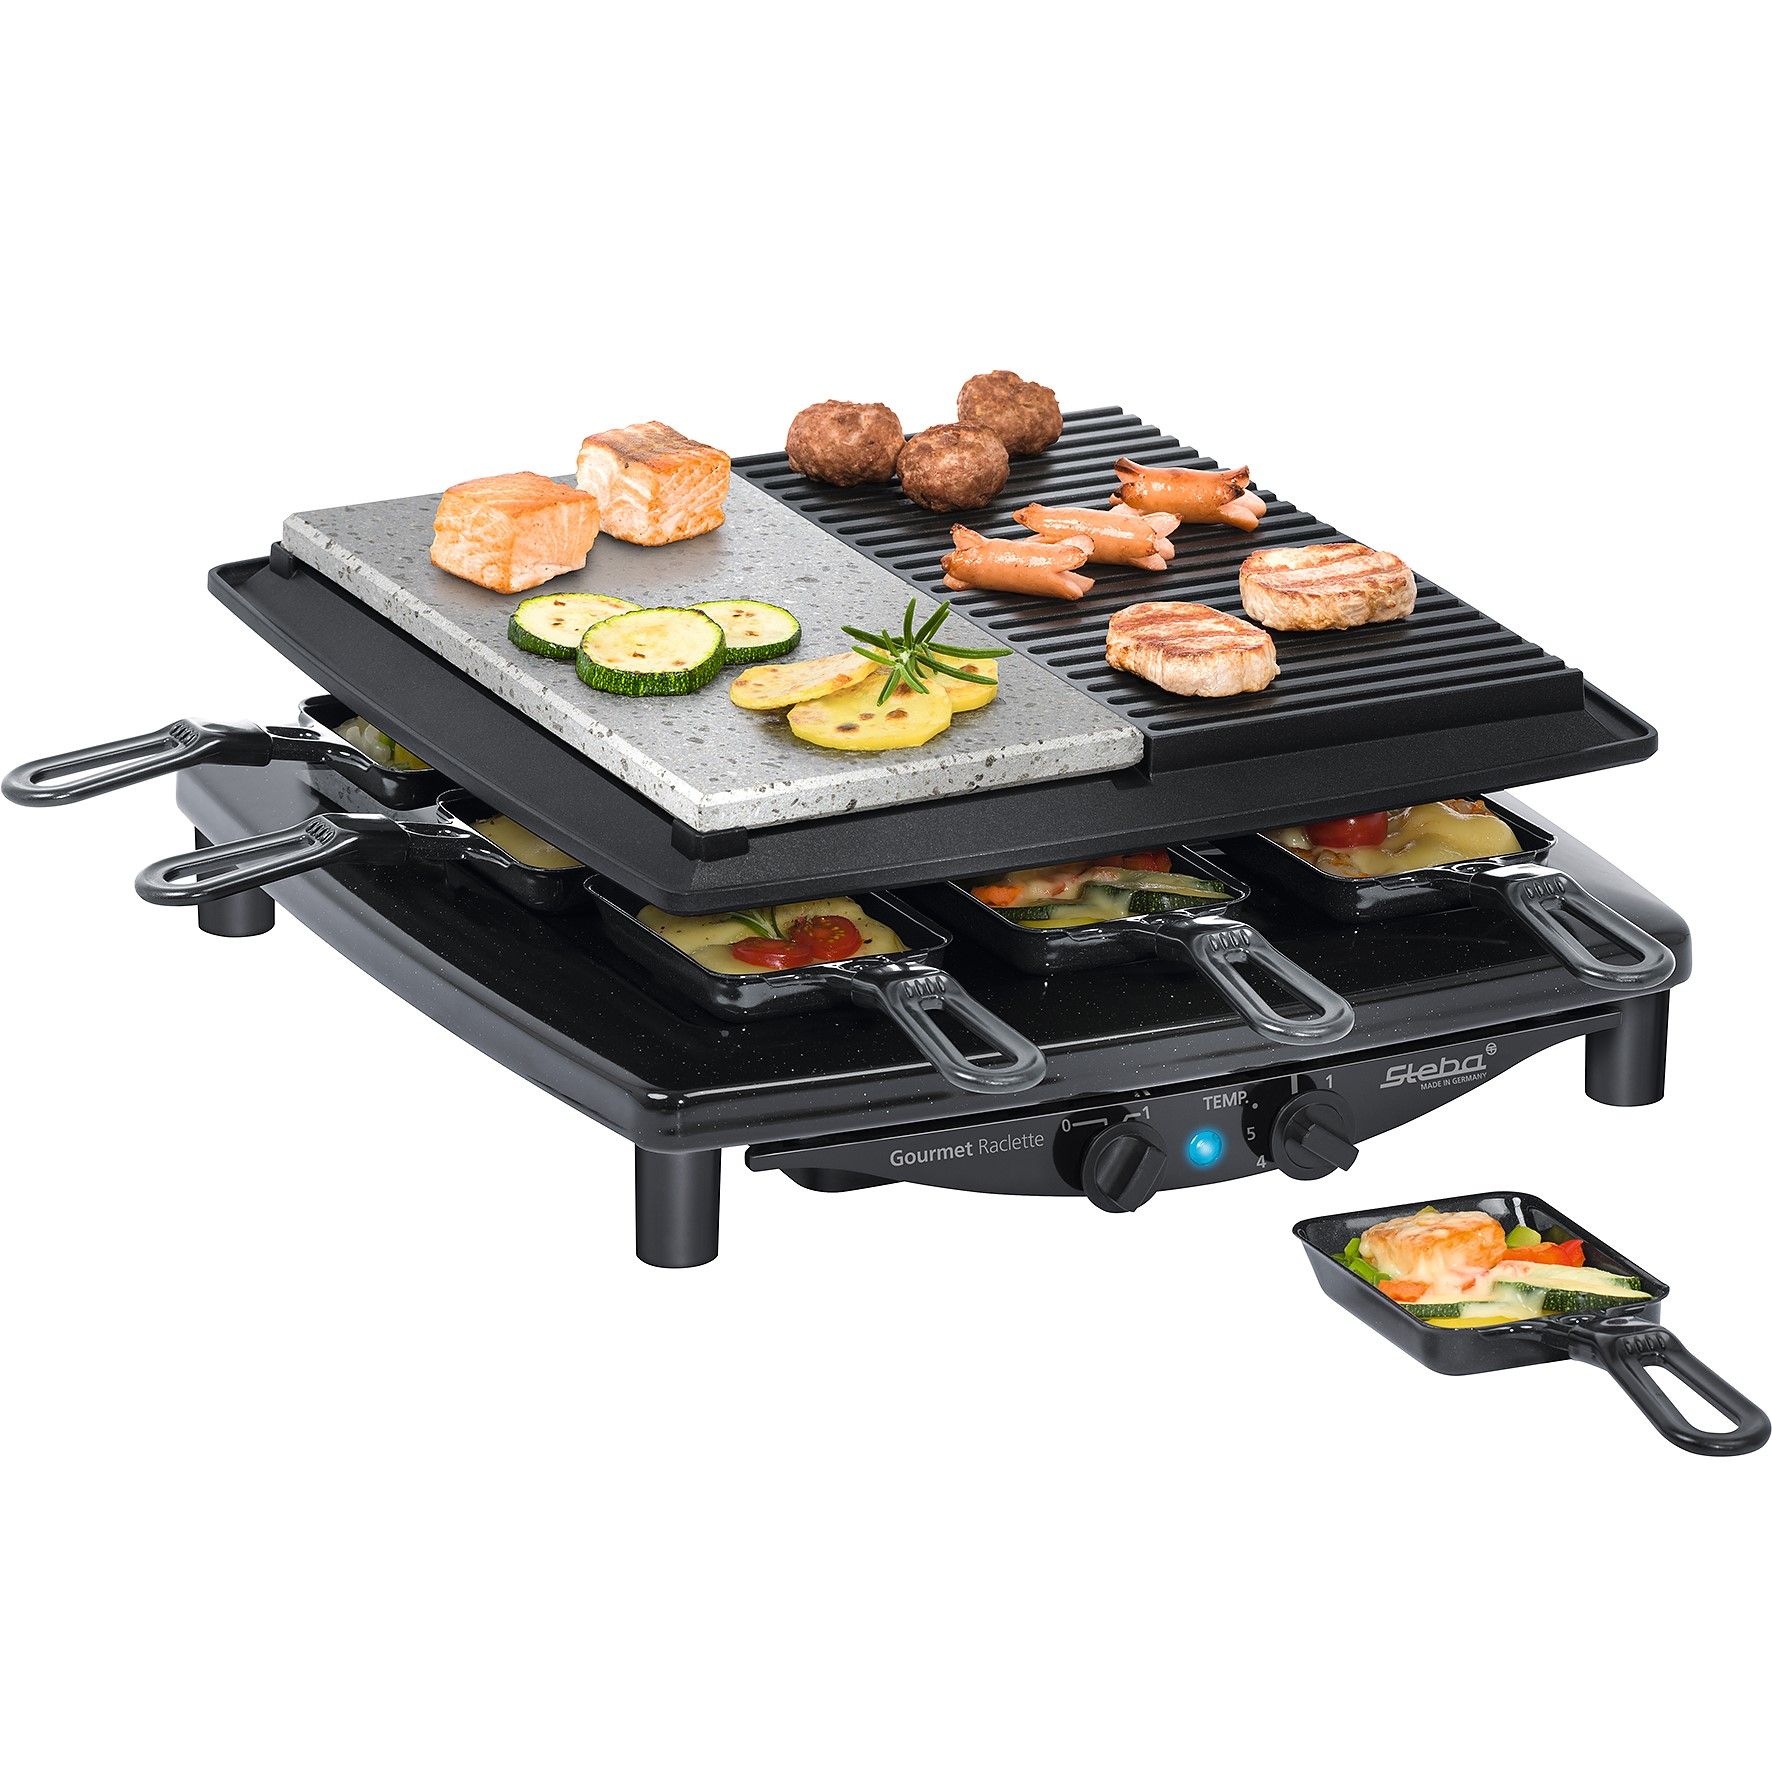 Steba Rc-4-plus Premium Quality Electric Raclette For 6 People – Black Non-stick Coated Grill Plate, Cut & Scratch-resistant Stone Plate, Made In Ge